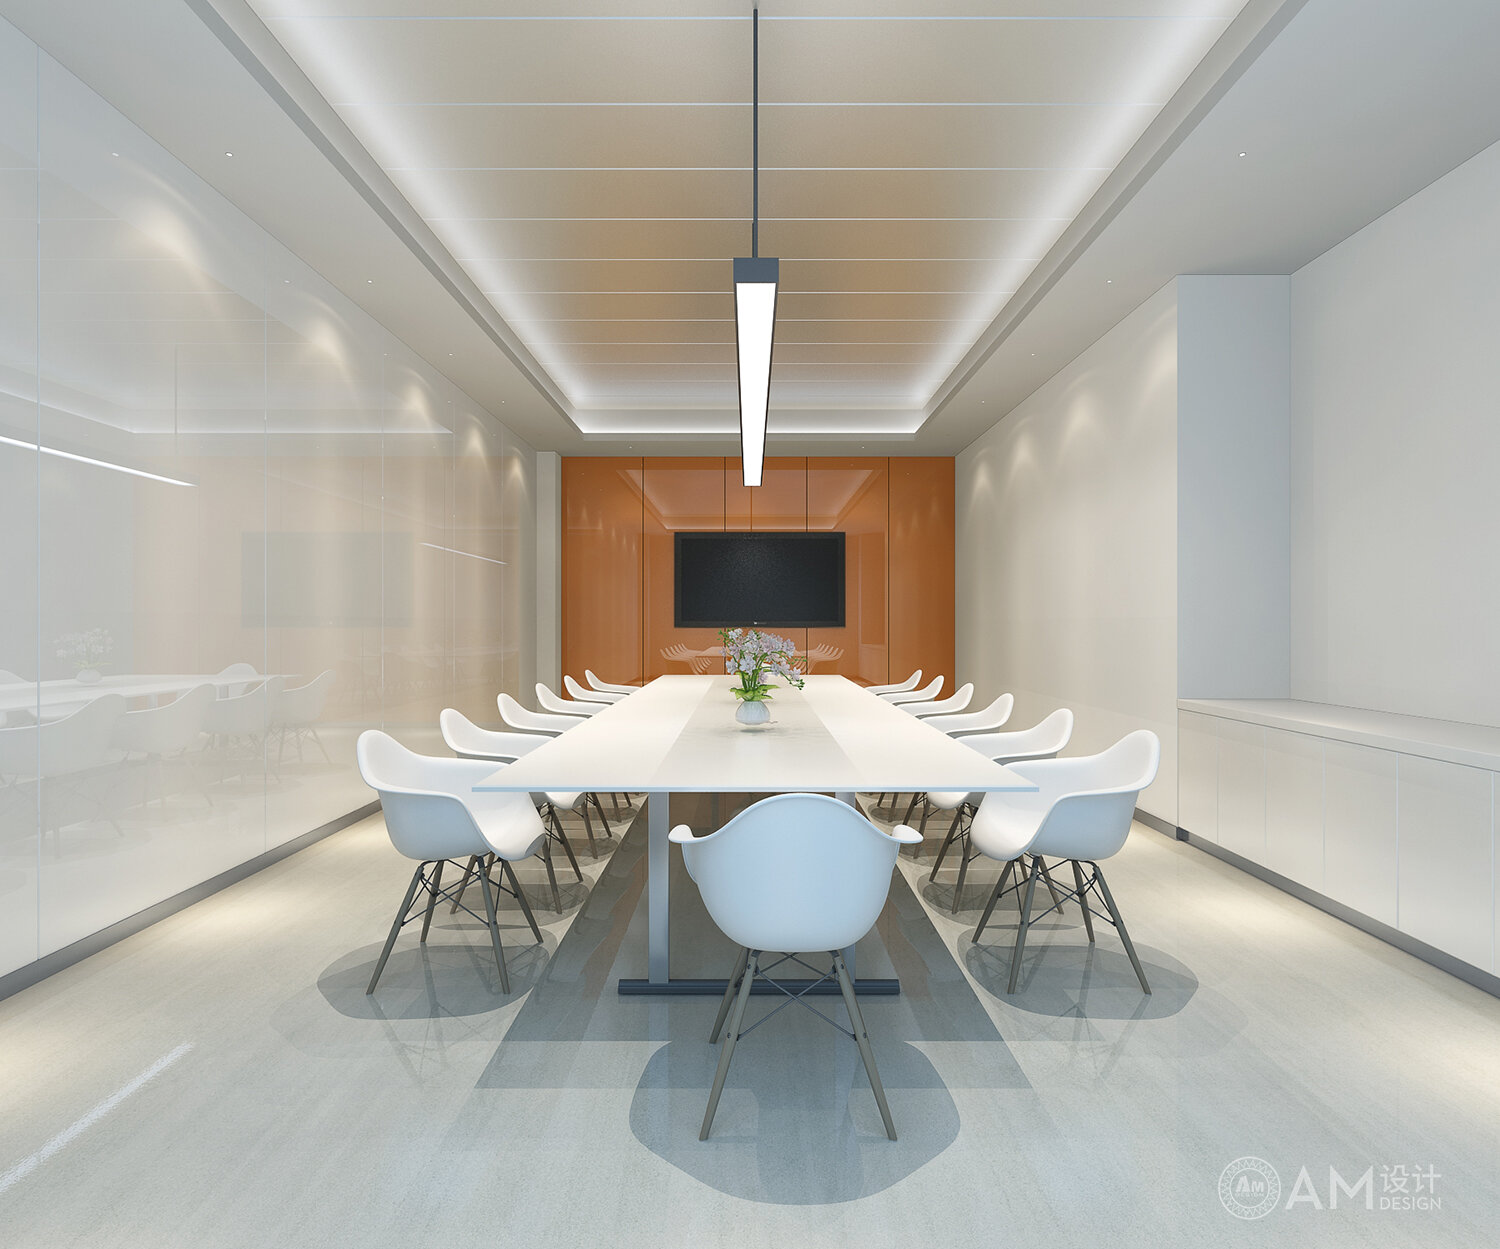 AM DESIGN | Bathroom Design of Thermal Office Building in Tongzhou New City, Beijing